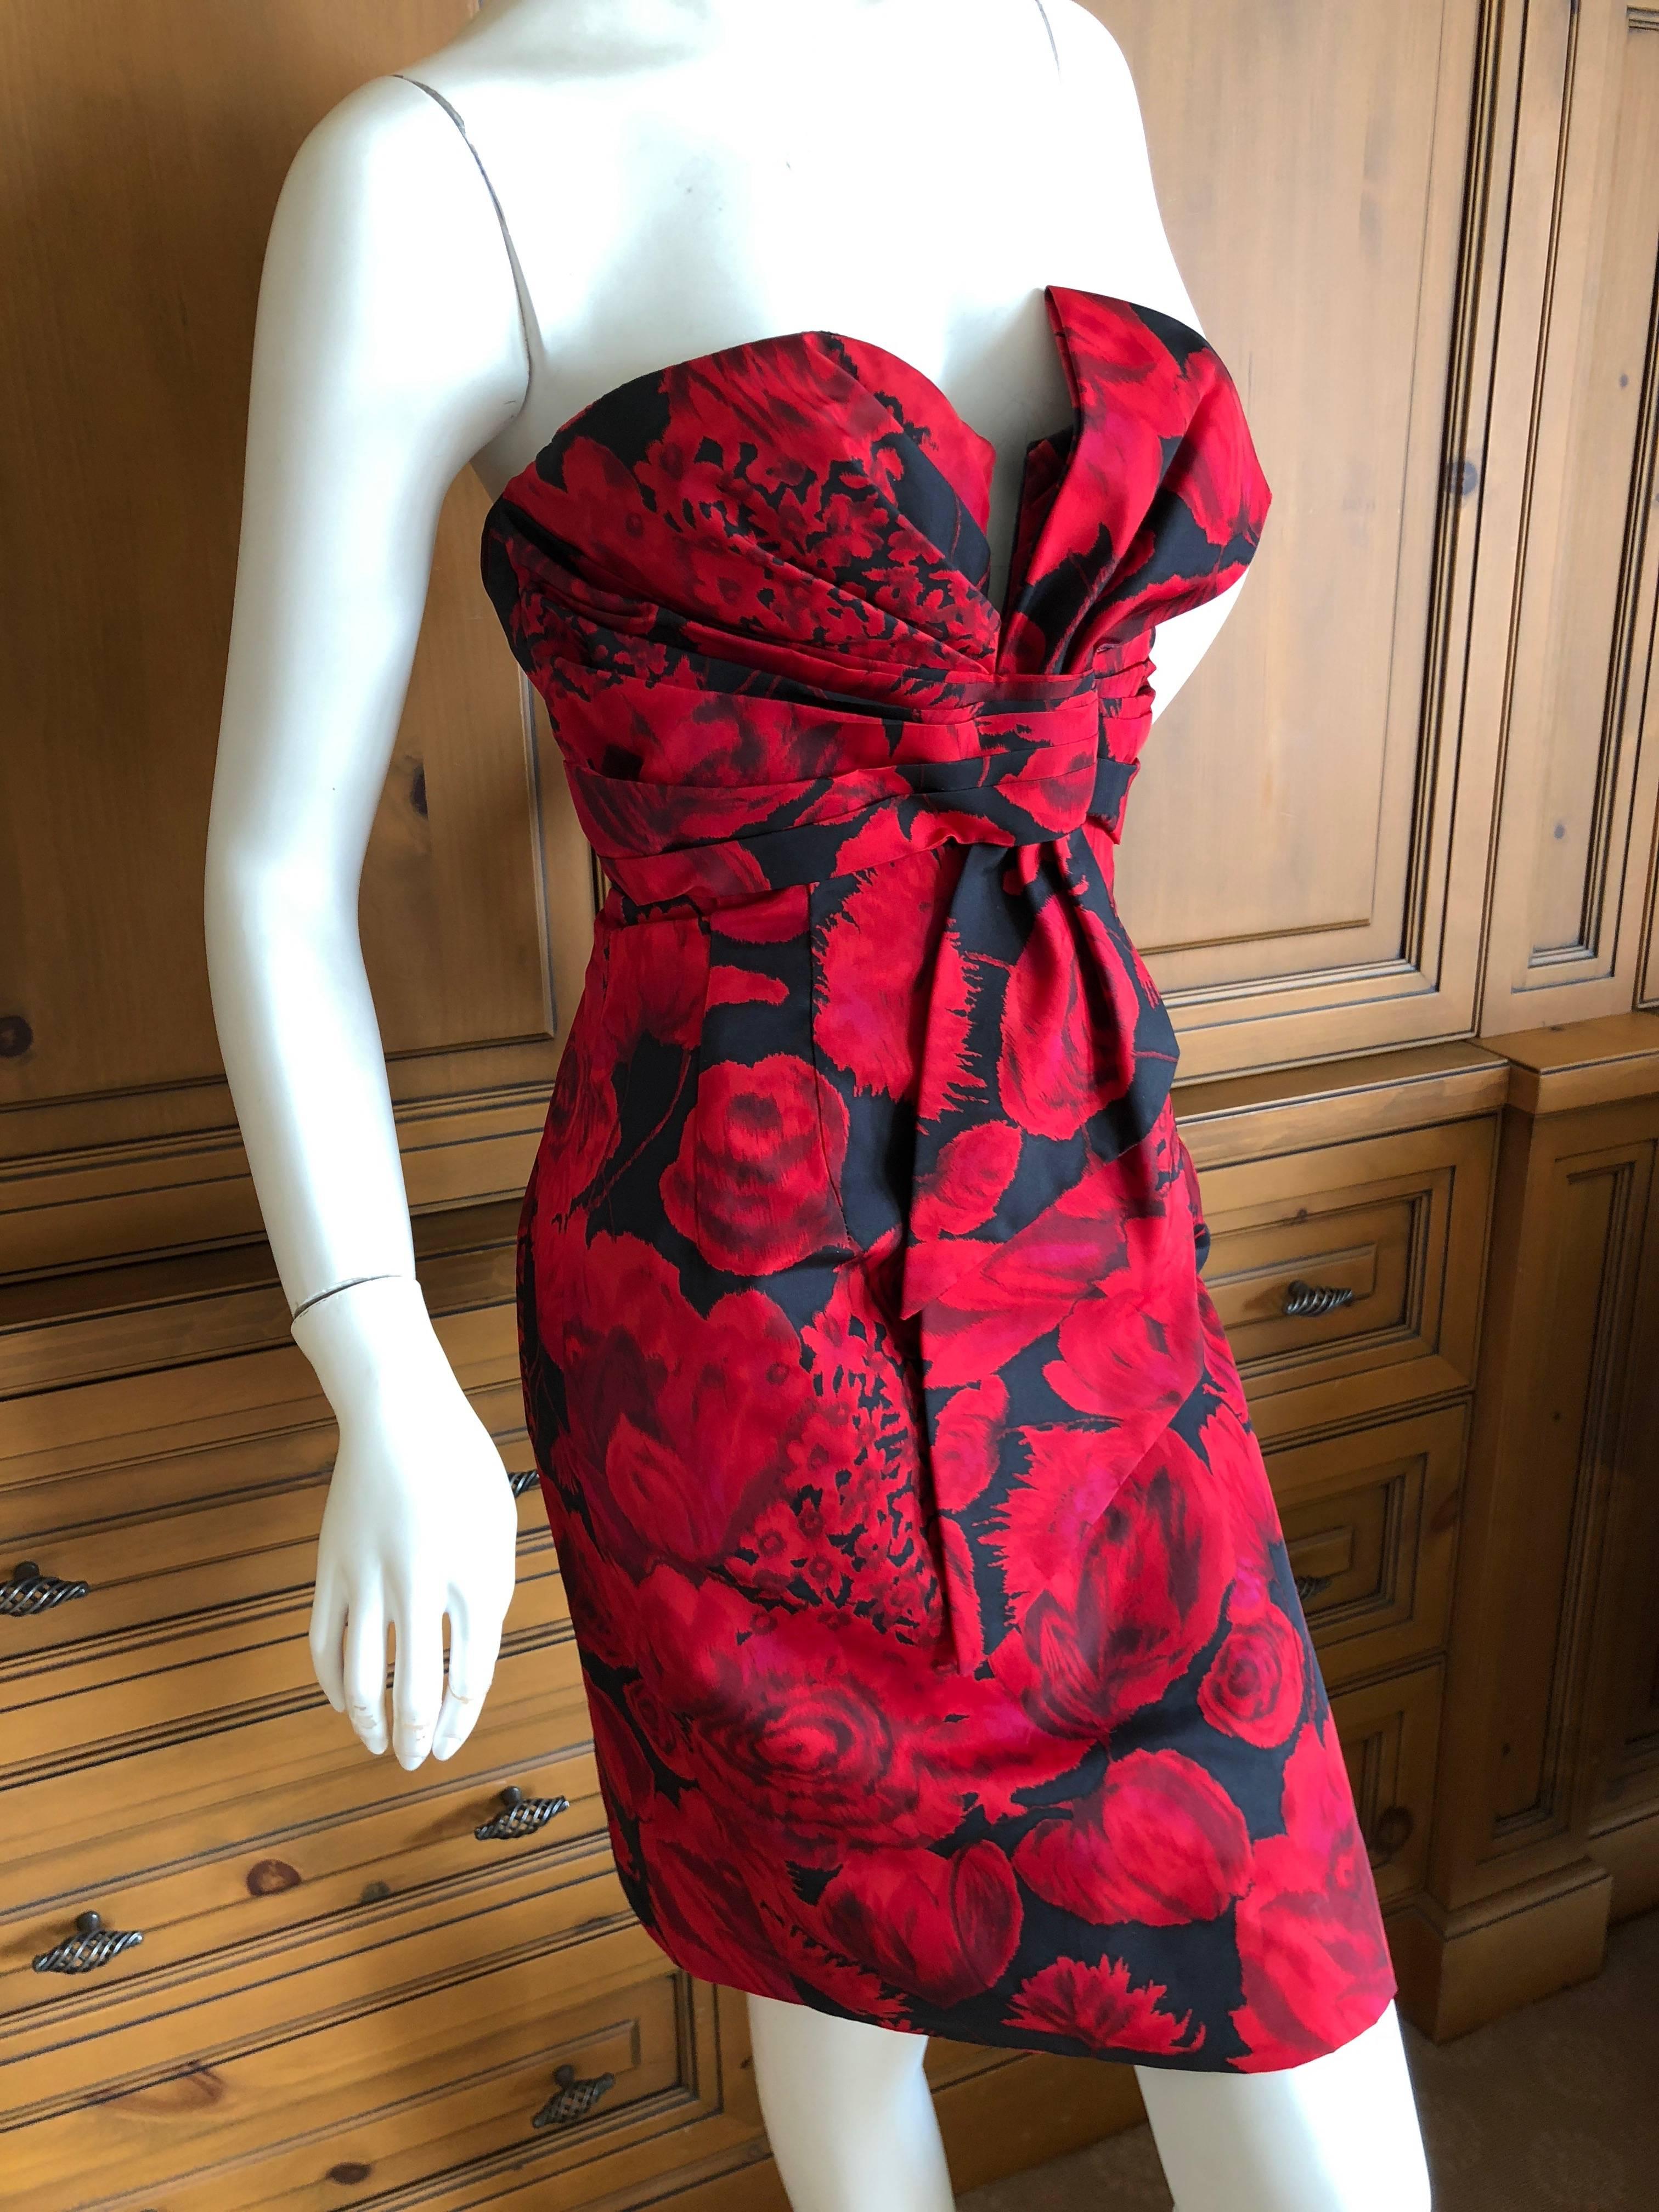 Christian Dior by John Galliano Red Floral Strapless Dress, Pre Fall 2009  In Excellent Condition For Sale In Cloverdale, CA